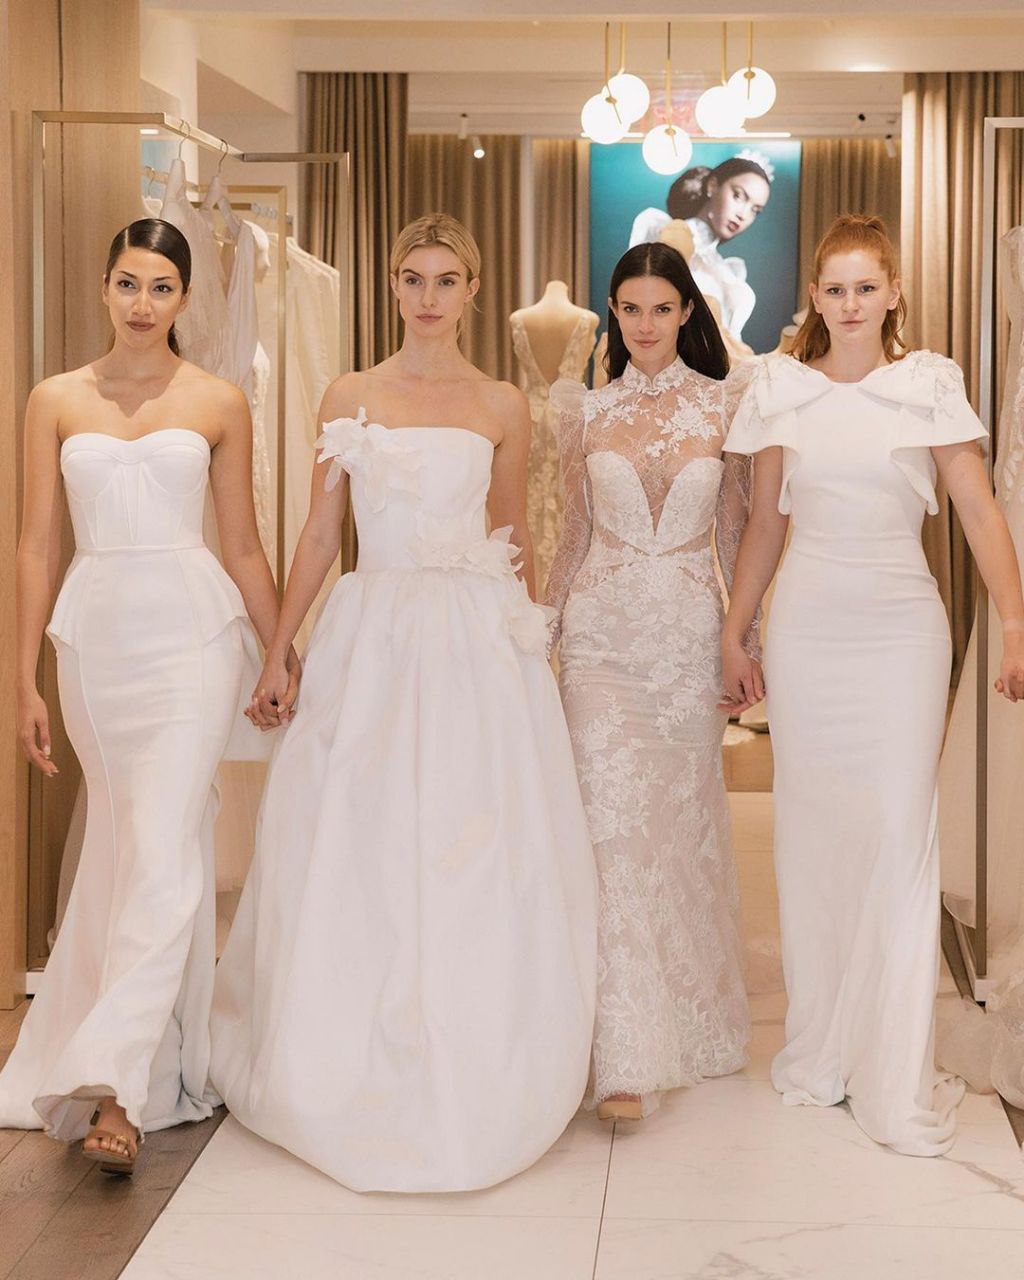 56 Mother-of-the-Bride Dresses That Wowed at Weddings